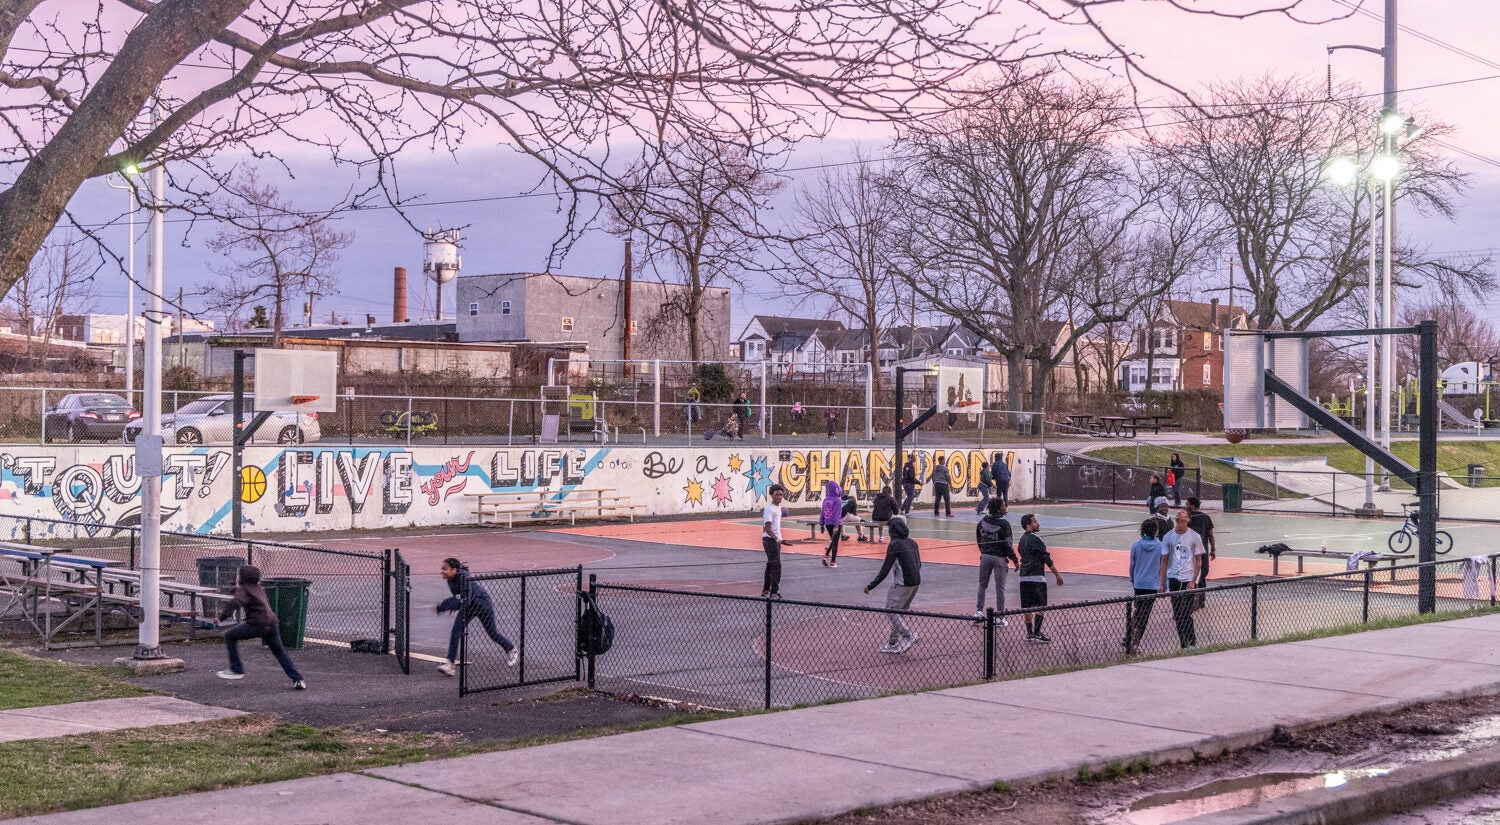 Kids playing on a basketball court at twilight